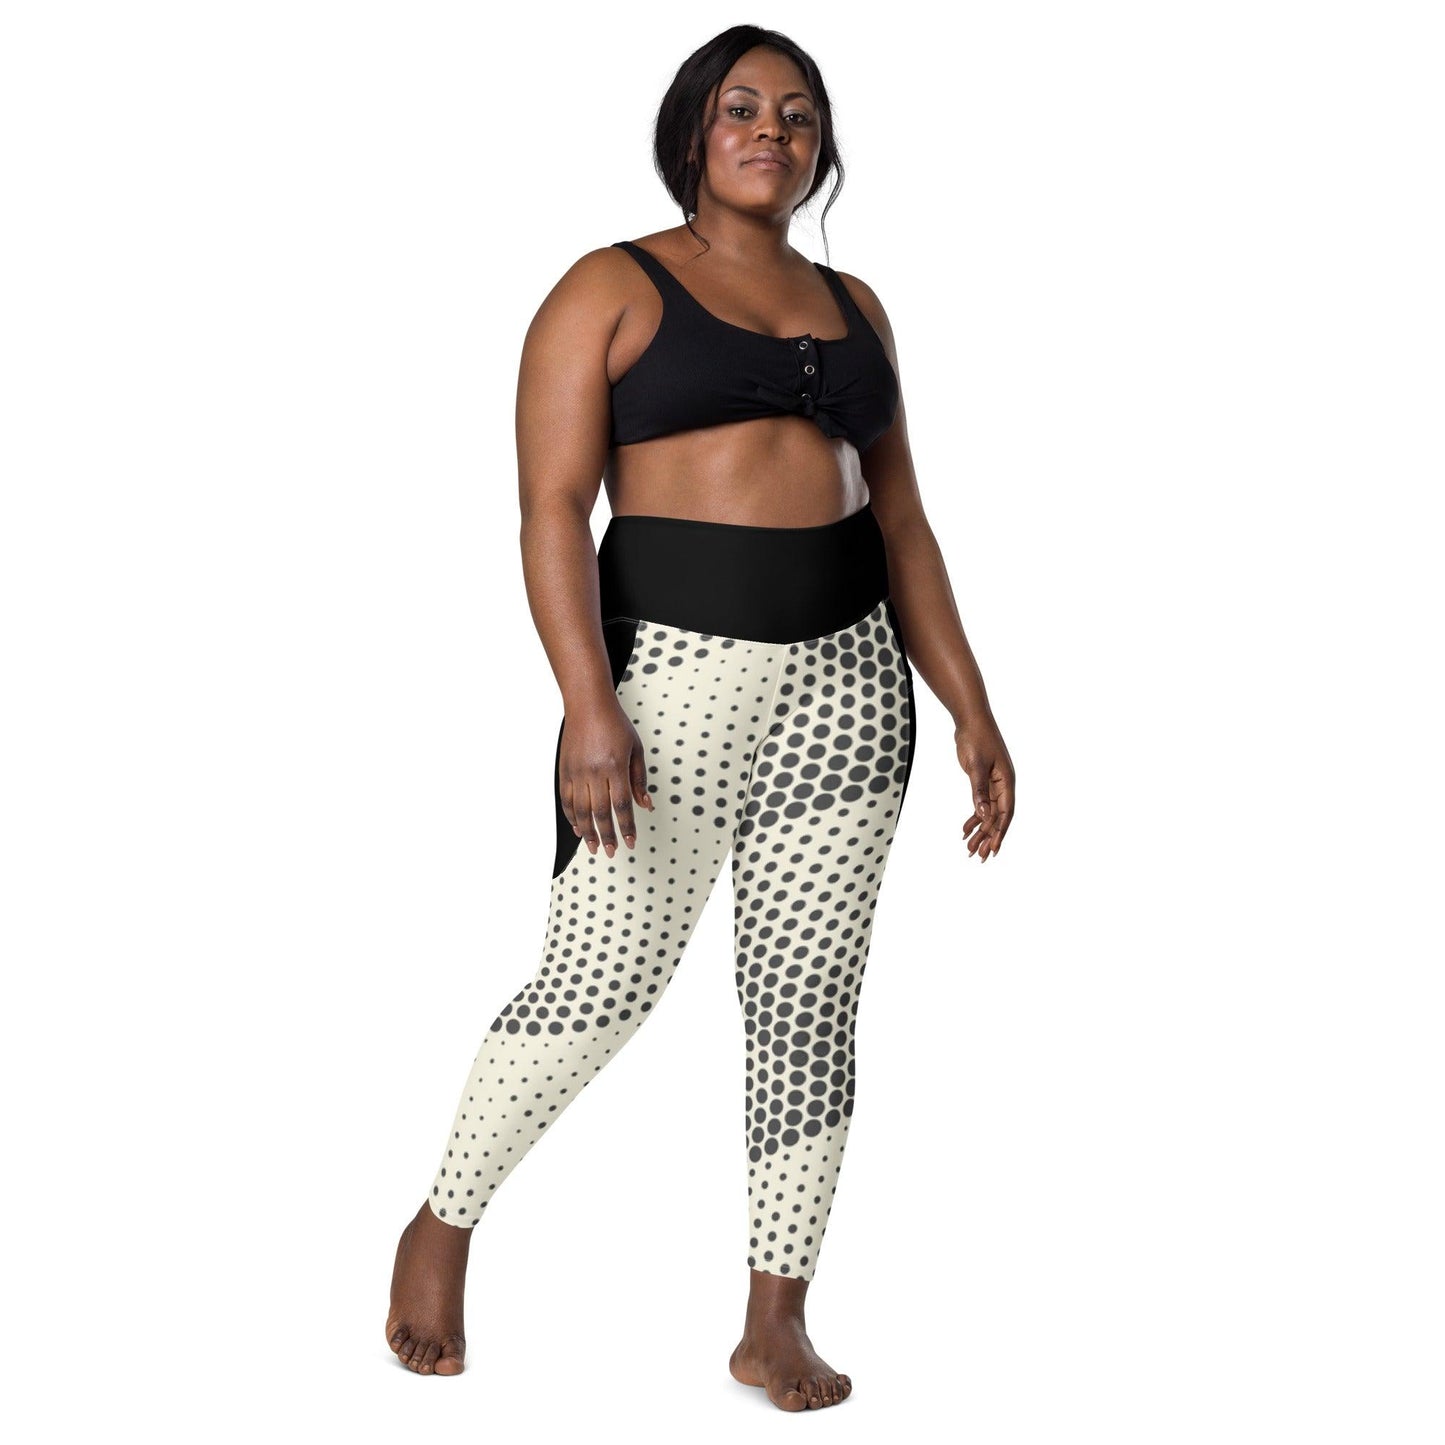 Checkers Leggings with Pockets - L & M Kee, LLC